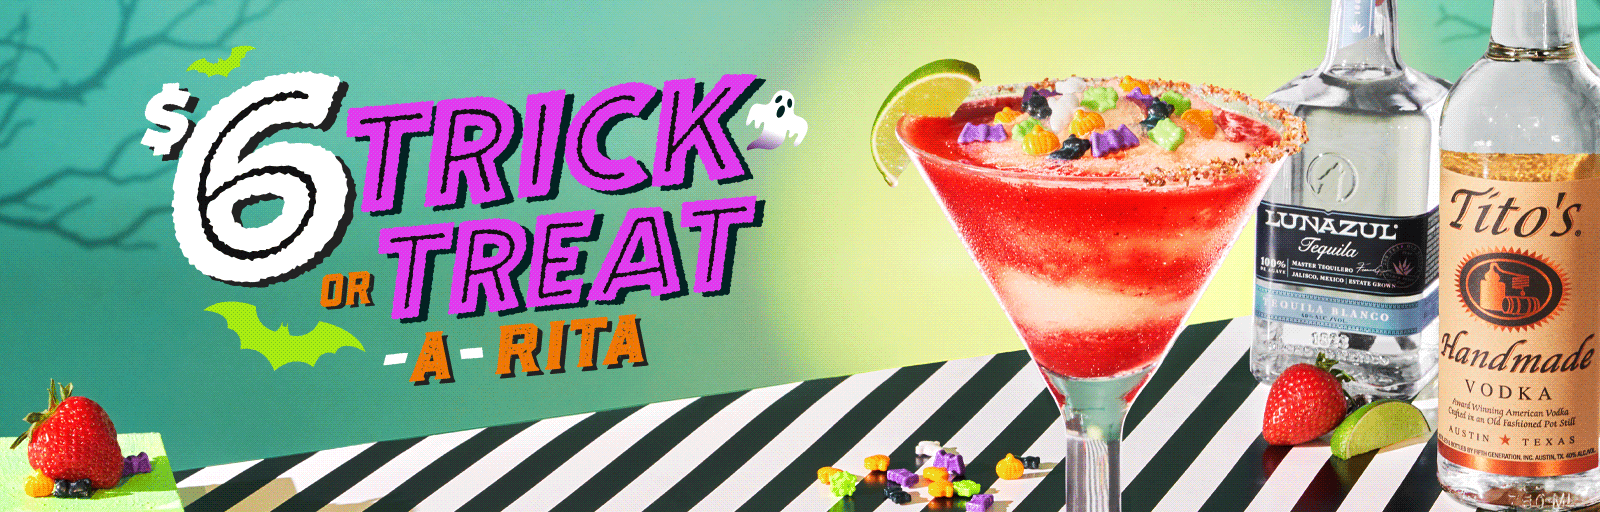 Chili's October Trick or Treat-A-Rita with Lunazul® Blanco Tequila, Tito's® Handmade Vodka, fresh sour and strawberry puree is topped with Classic Frozen Margarita and sweet & tart Halloween candies.